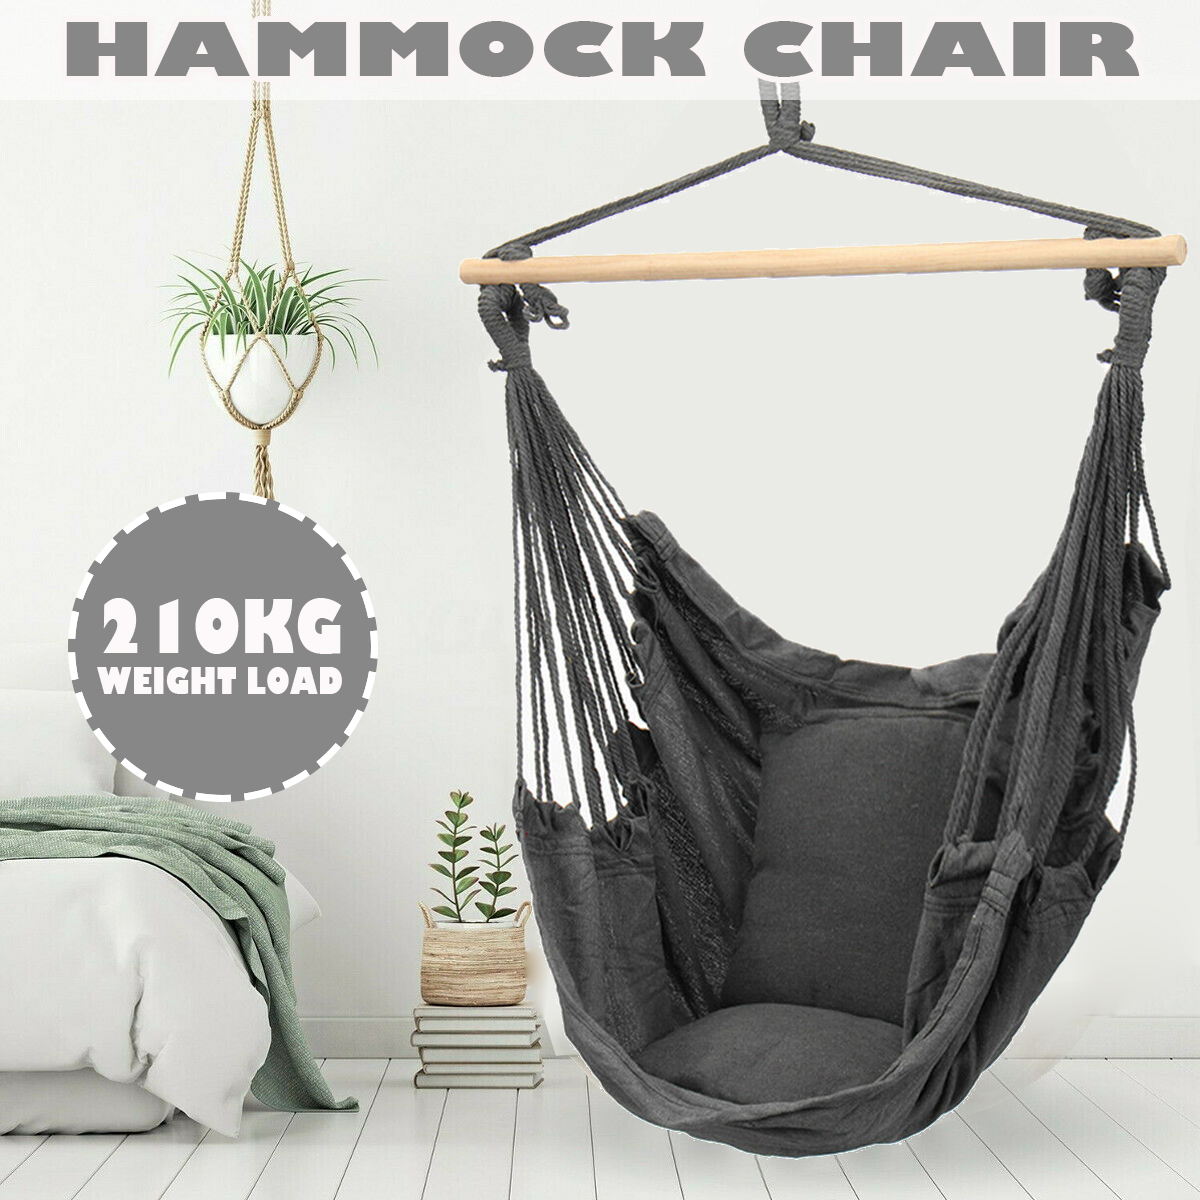 Garden Hammock Chair Hanging Swing Seat With Cushion Outdoor Camping Christow 